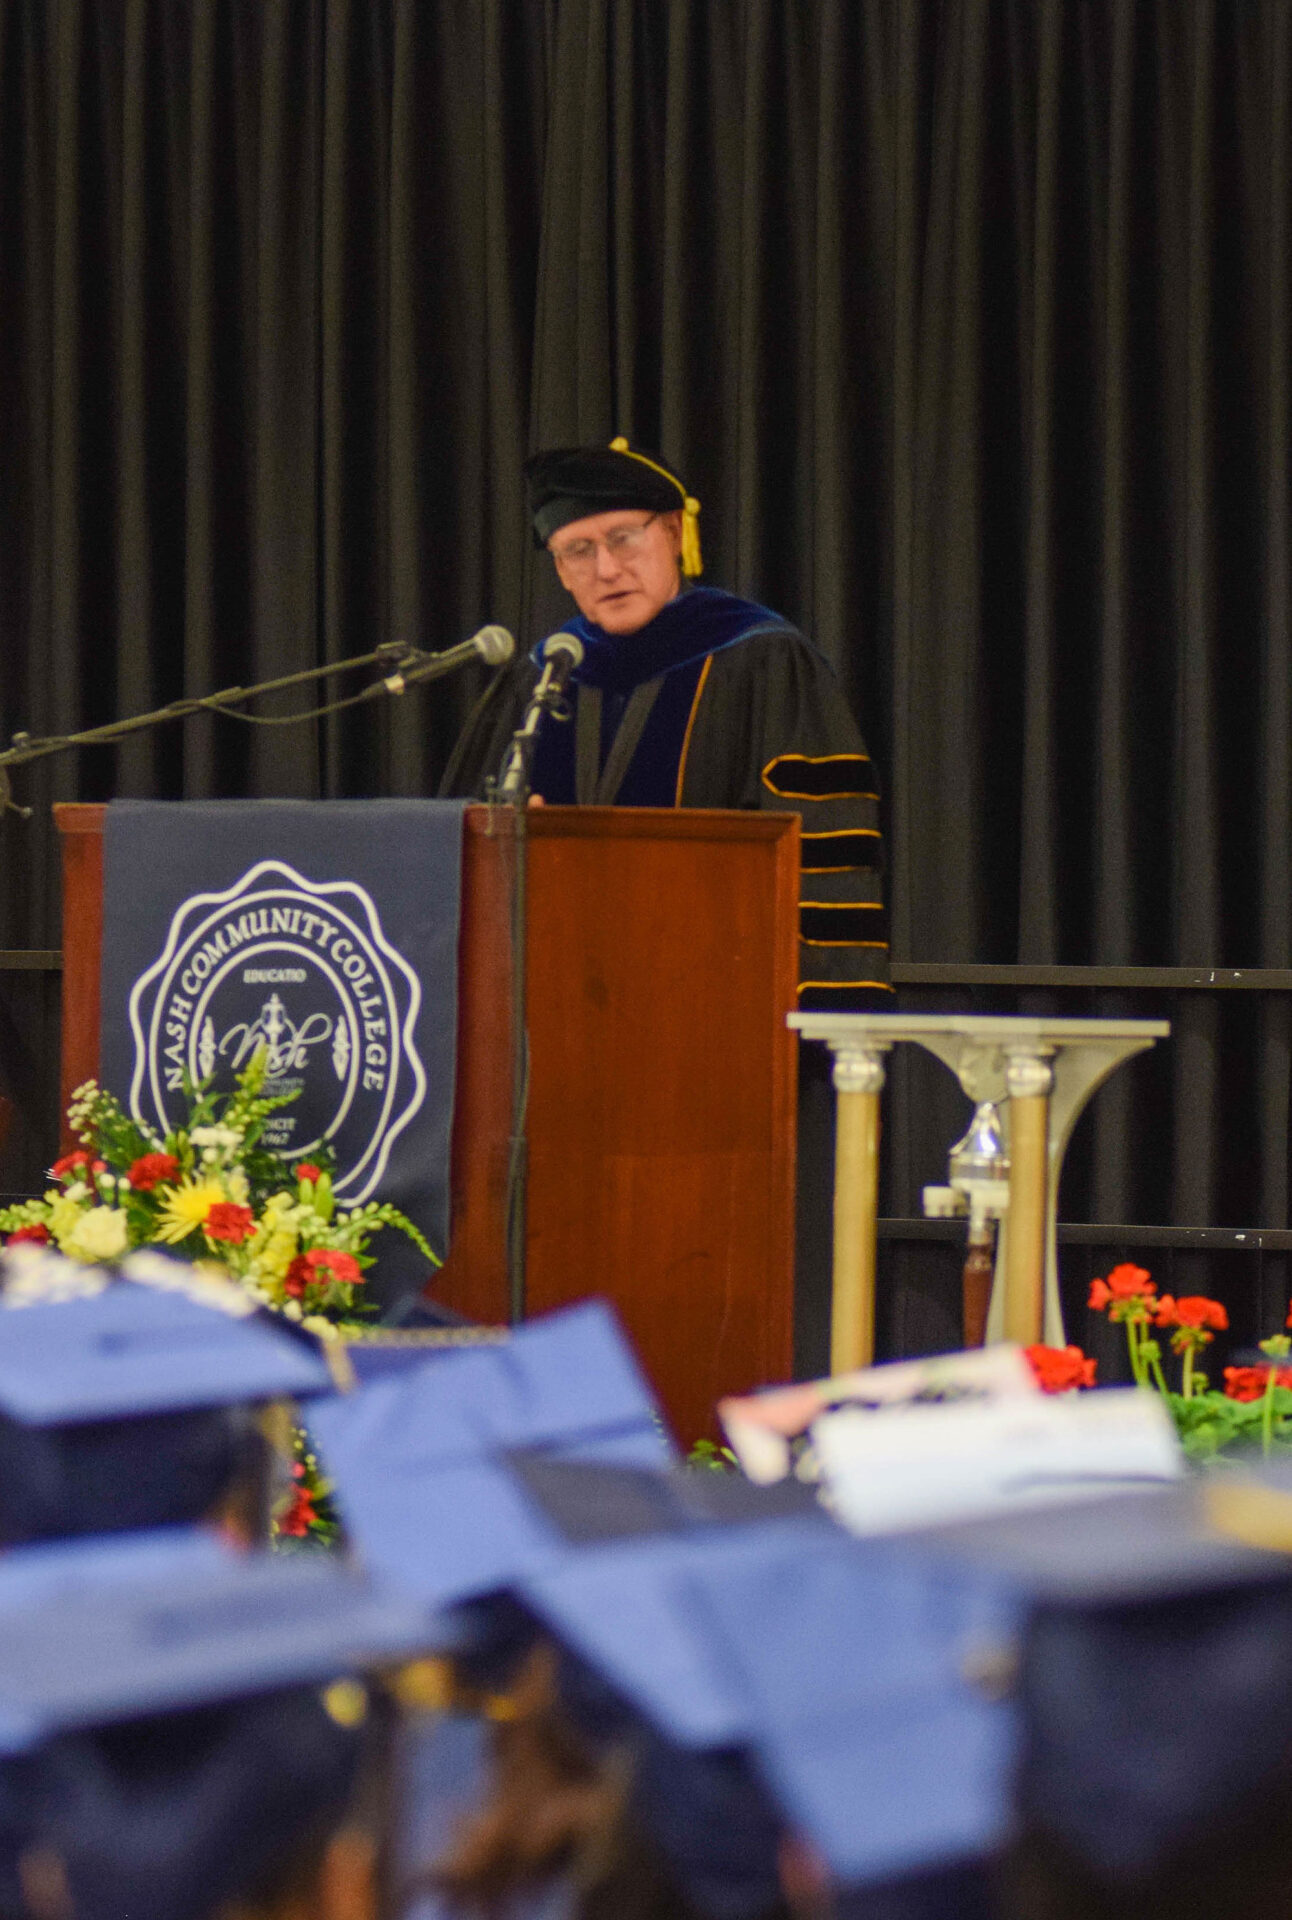 President of Nash Community College deliver speech to graduating students.